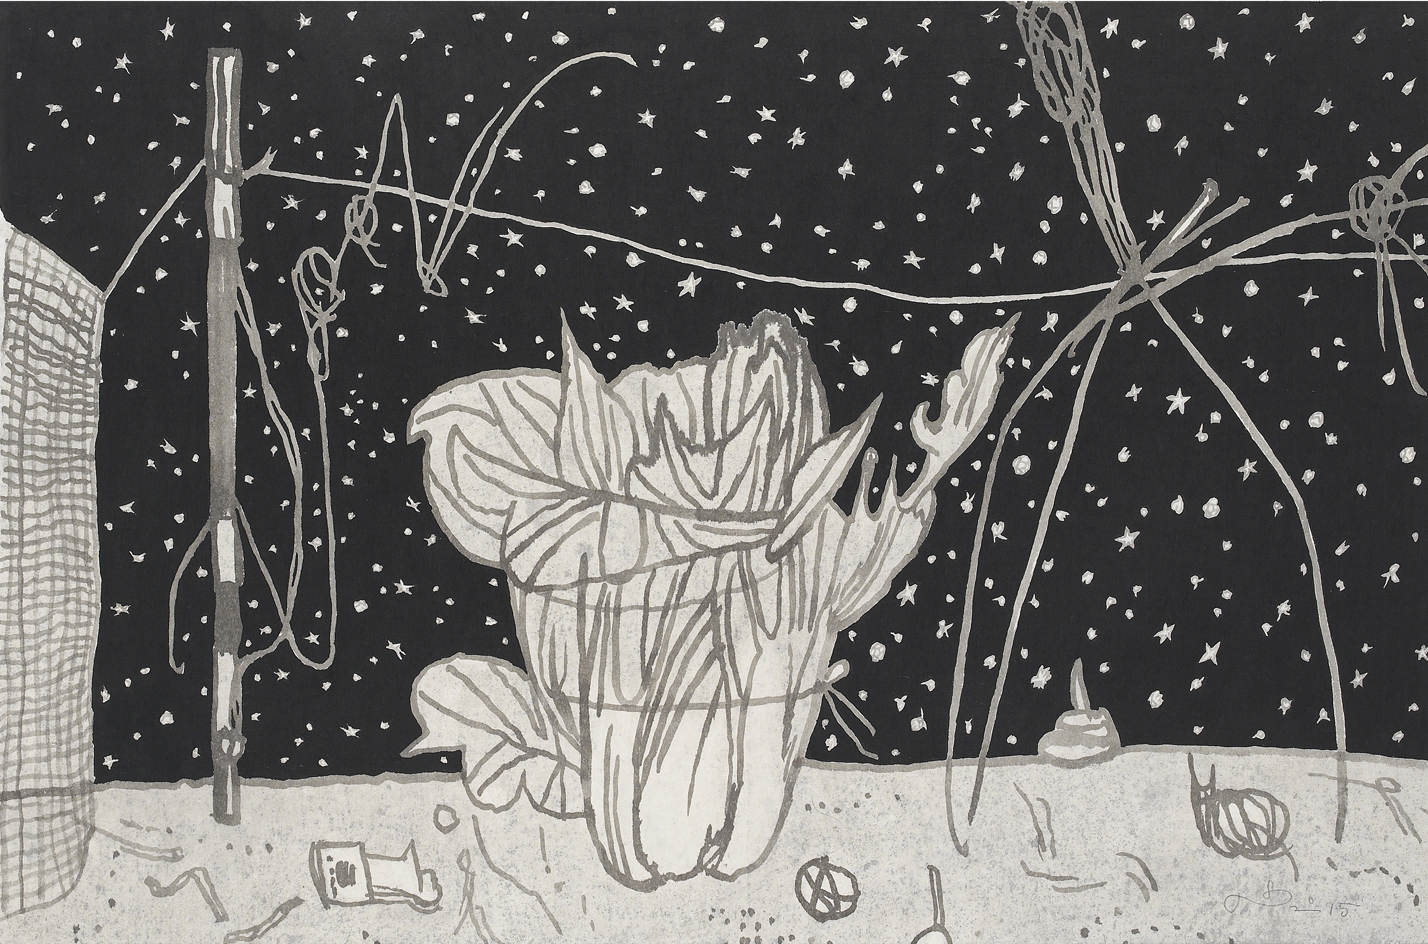 To show the star - Winter cabbage, 2015, Ink on rice paper, 66x97cm